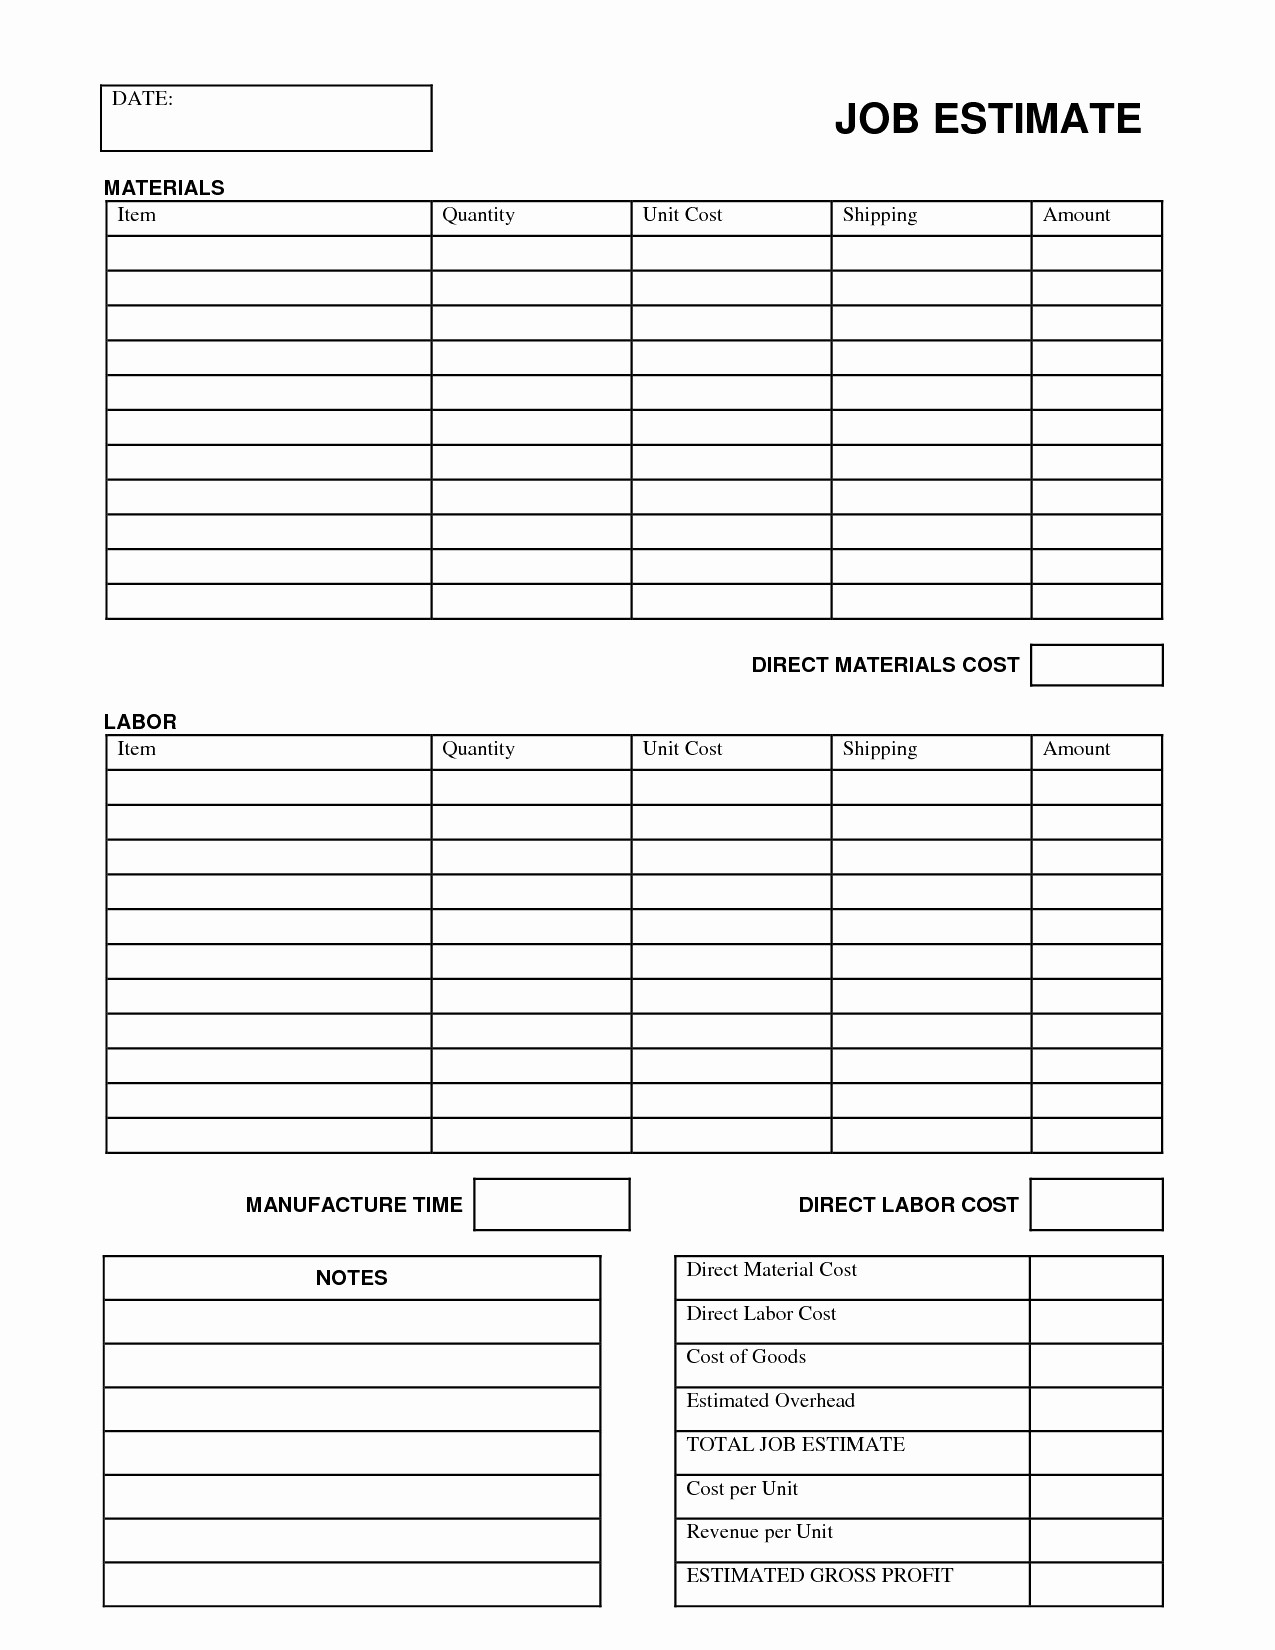 Piping Material Take Off Example Fresh Lumber Takeoff Spreadsheet Document